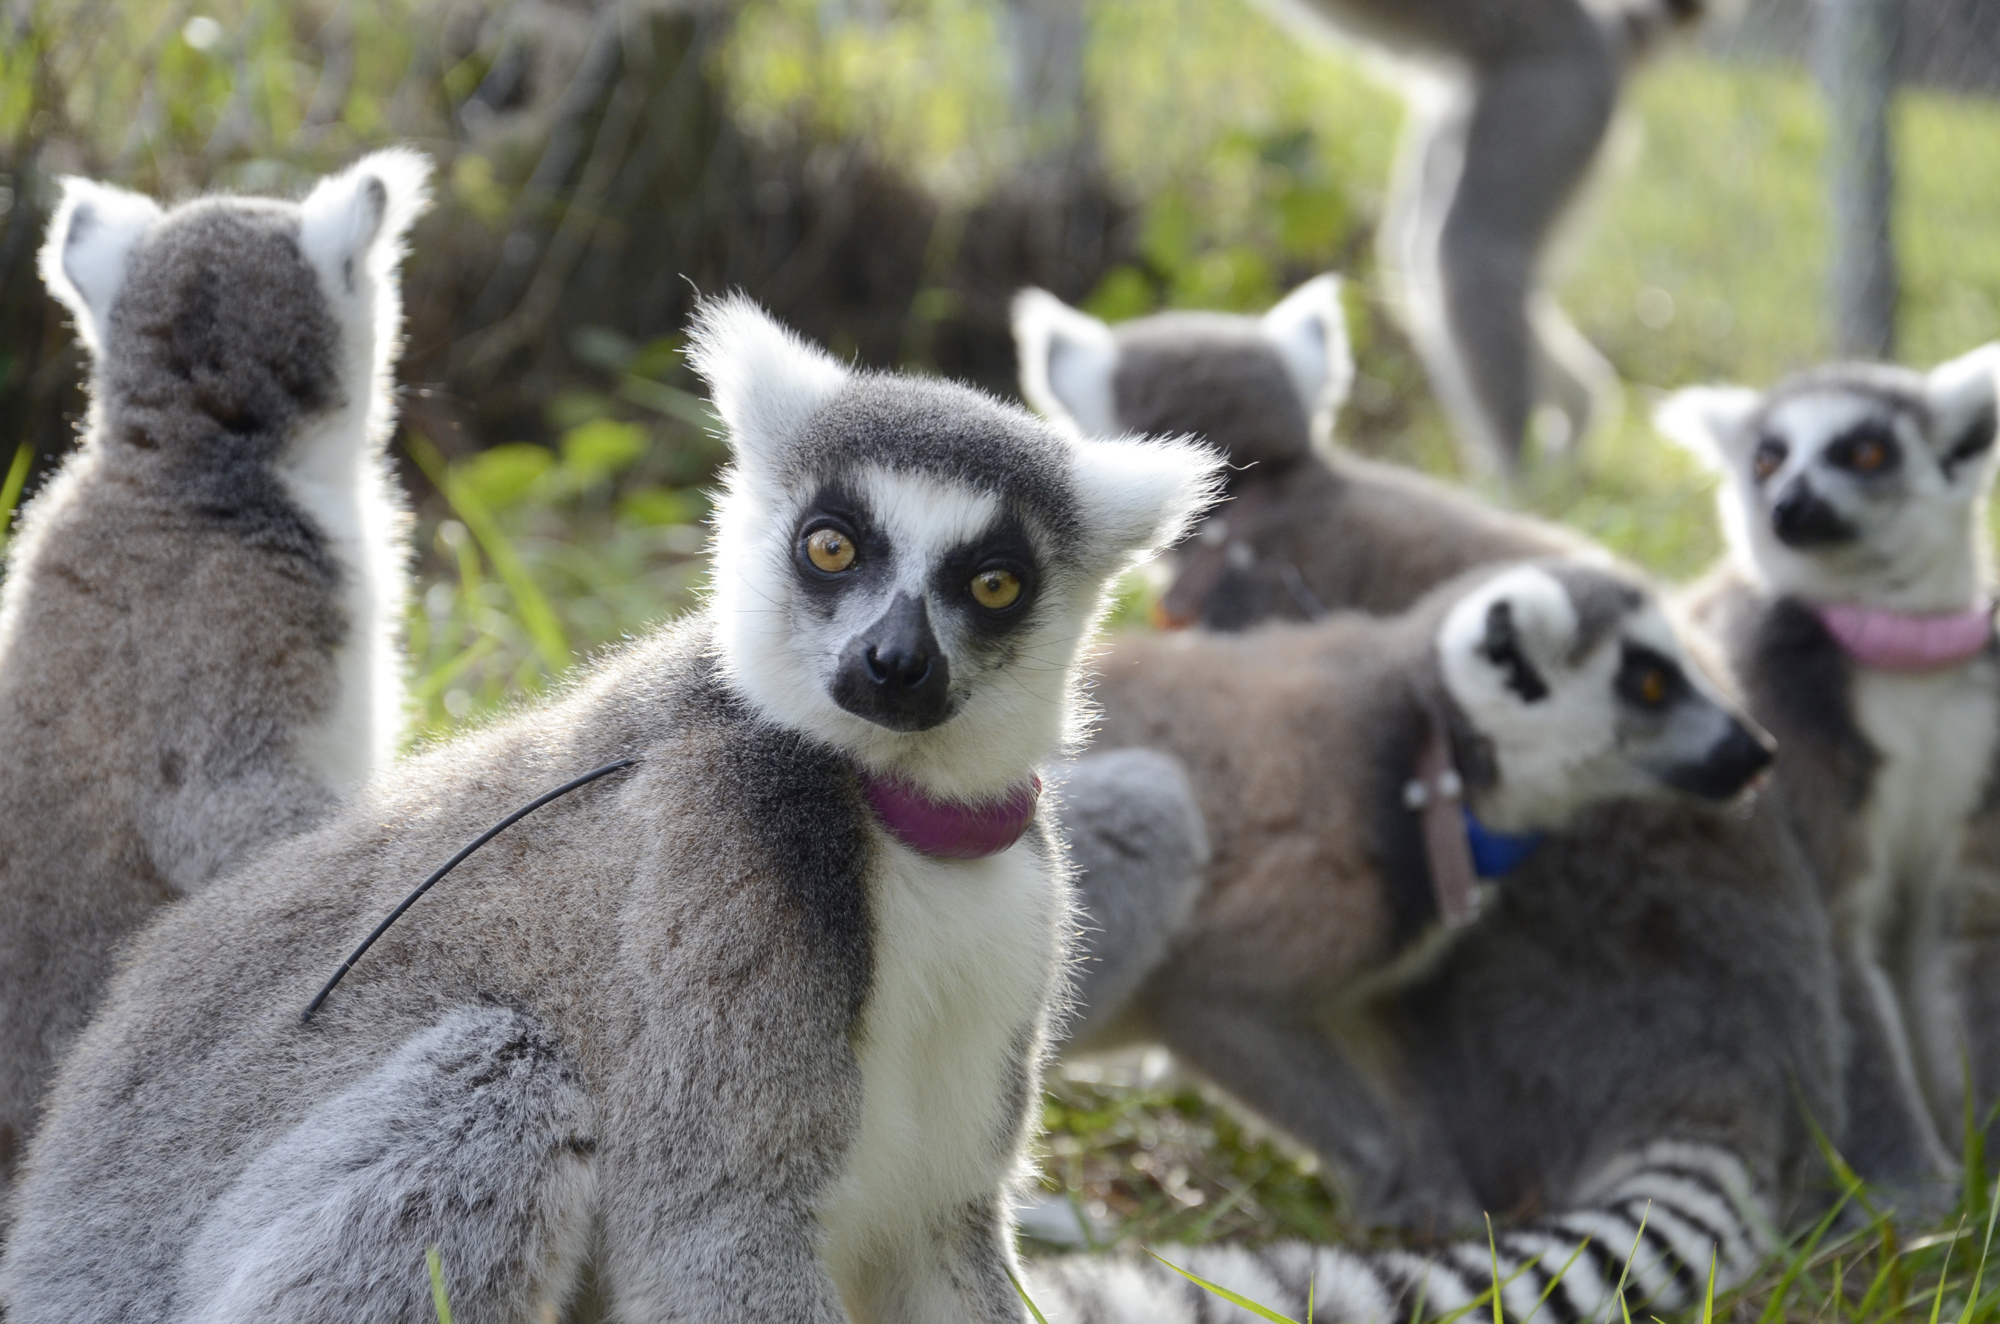 The lead female of this ring-tailed lemur family makes the decisions when the group moves or stays.